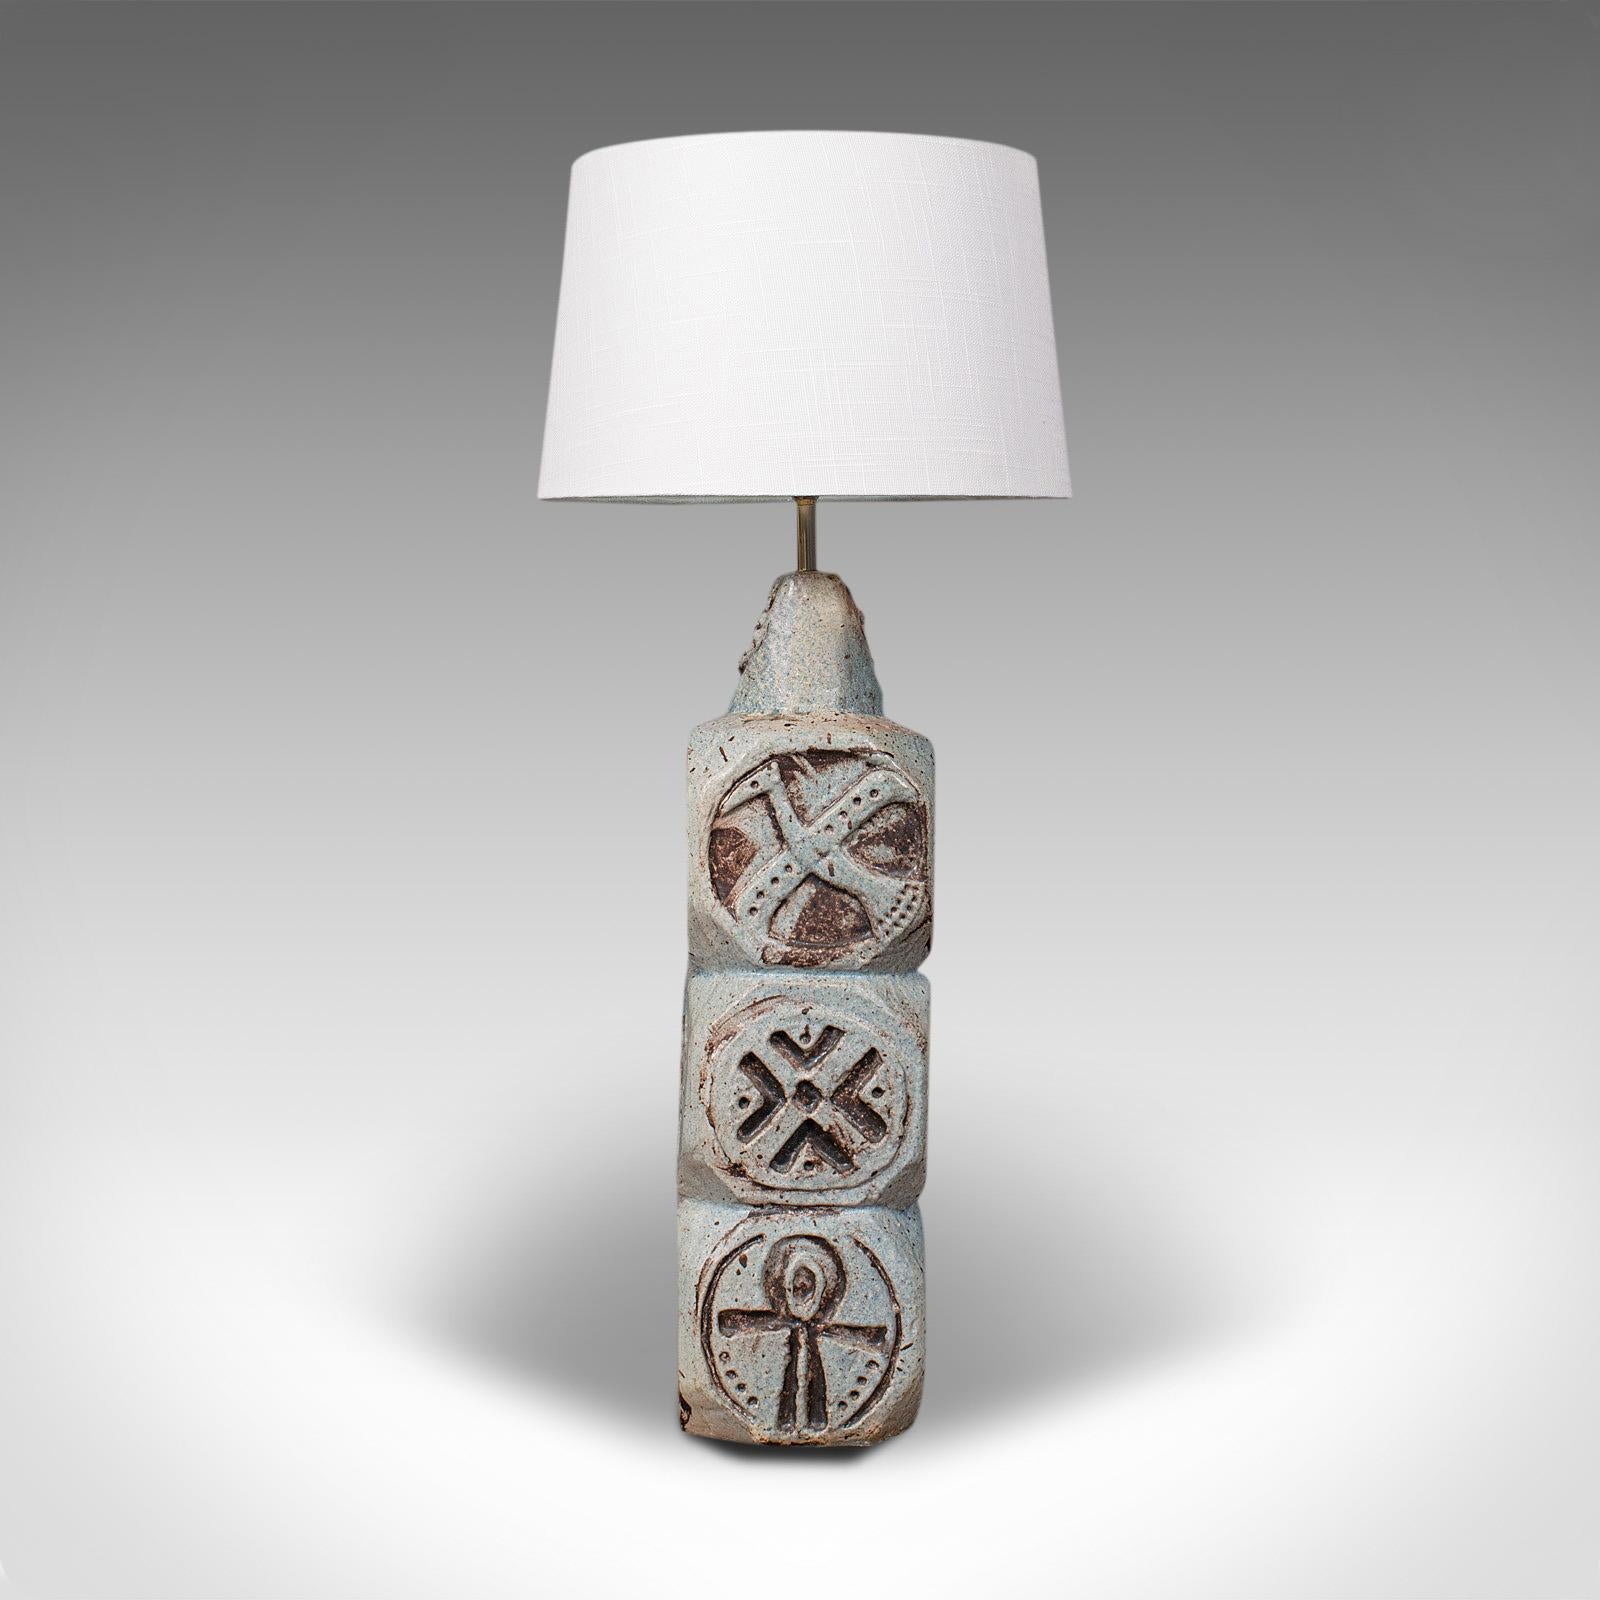 British Vintage Table Lamp, English, Ceramic, Side Light, After Troika, 20th Century For Sale